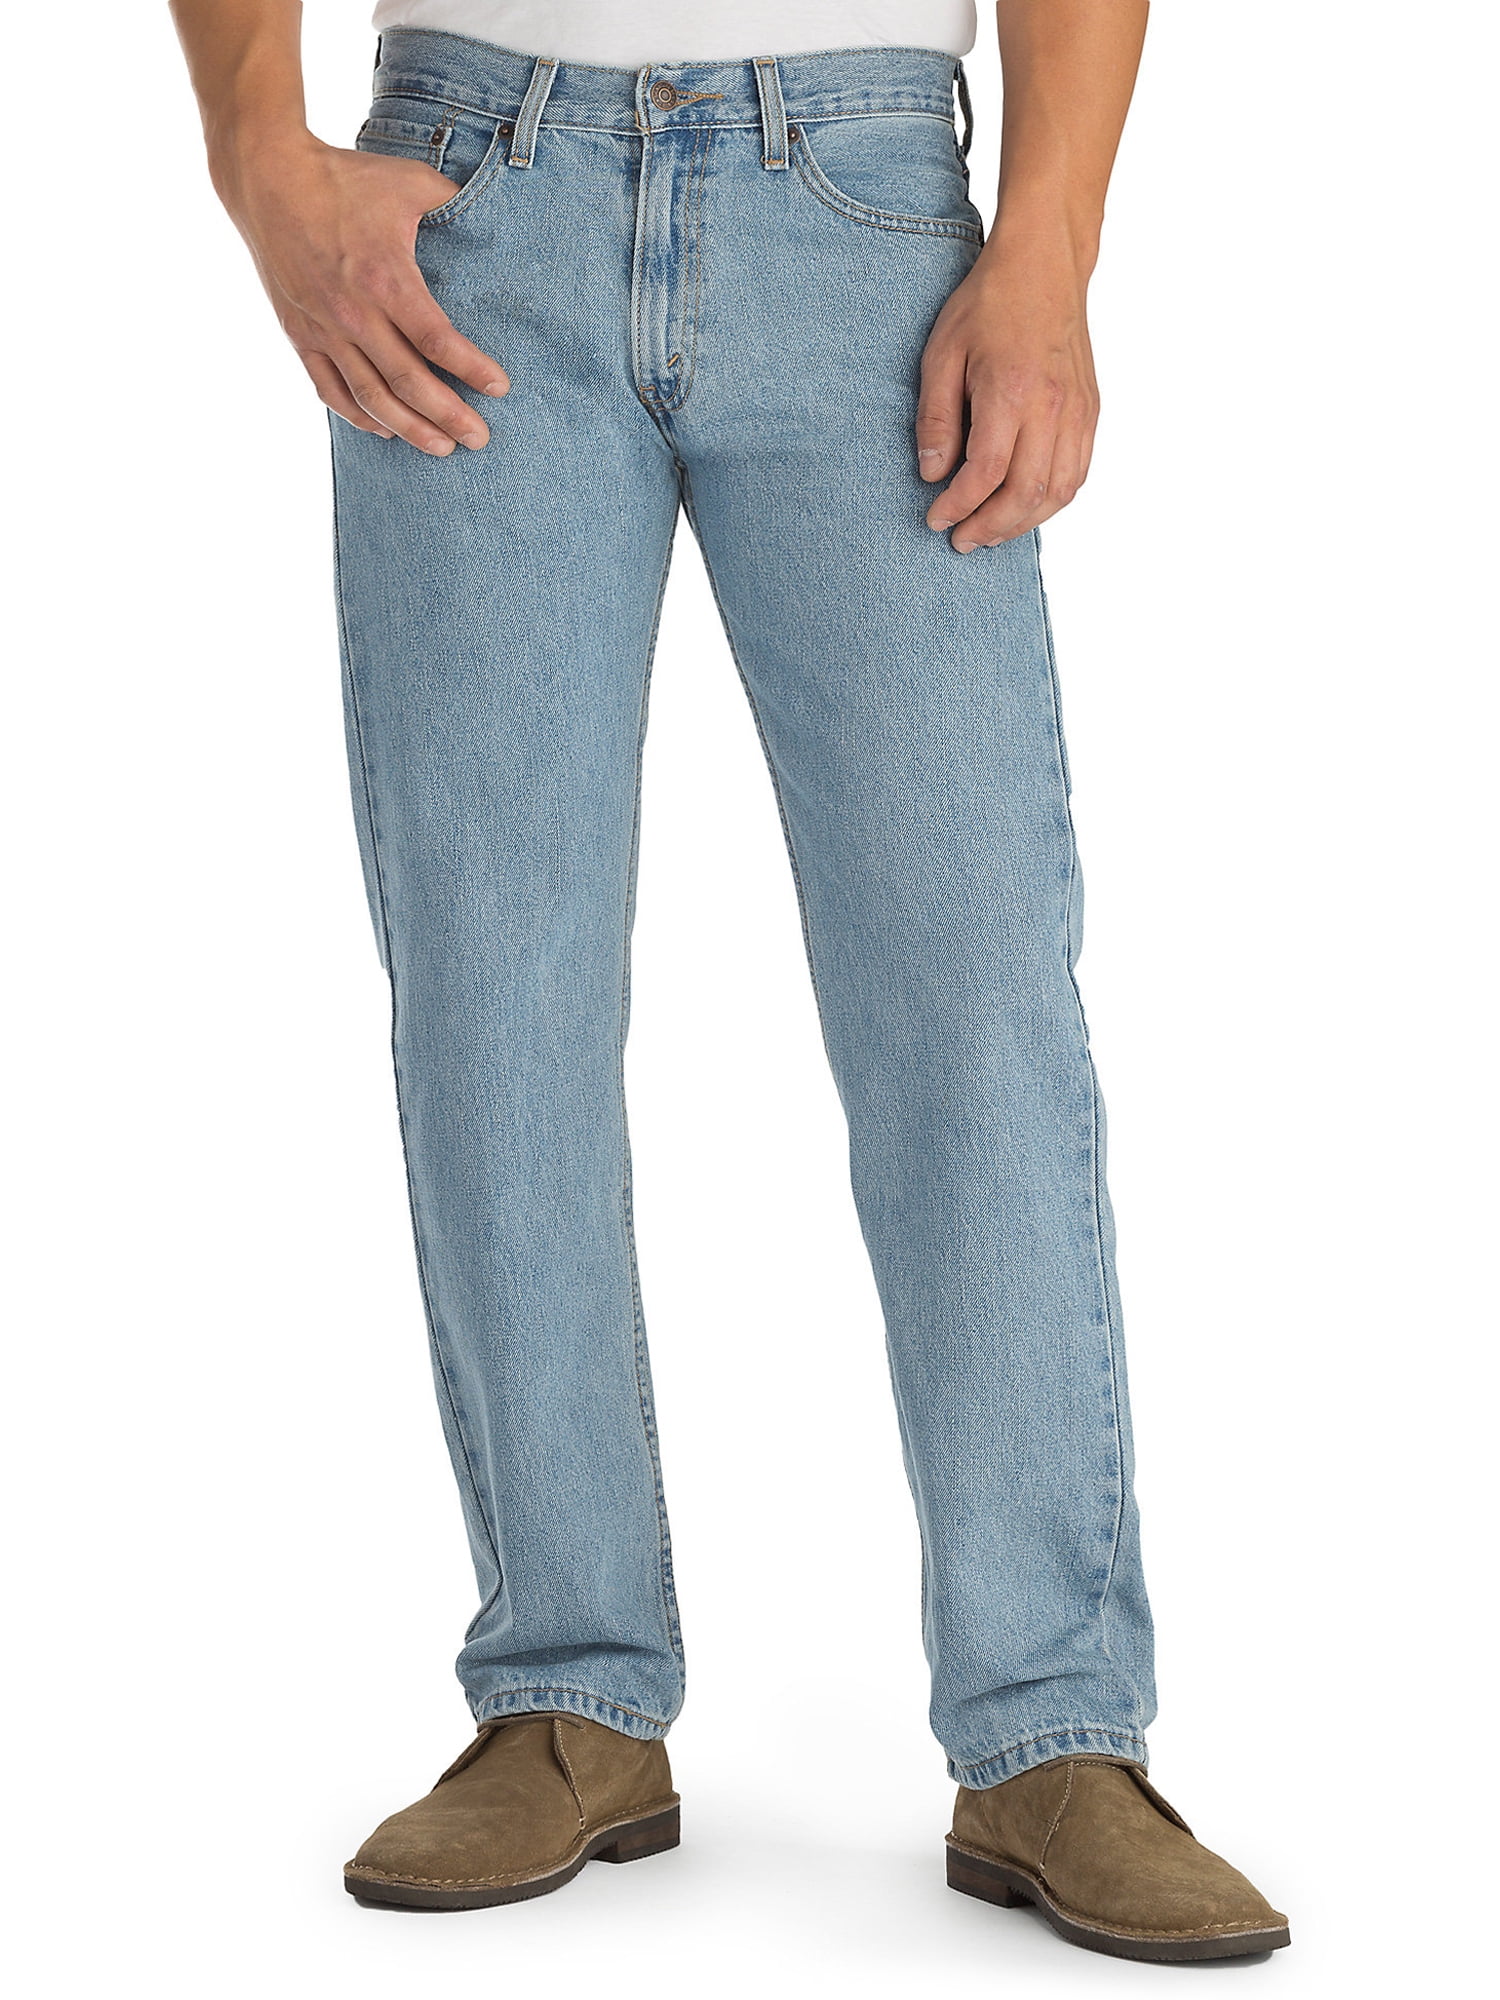 by Strauss Co. Jeans Regular Signature Fit Men\'s & Levi